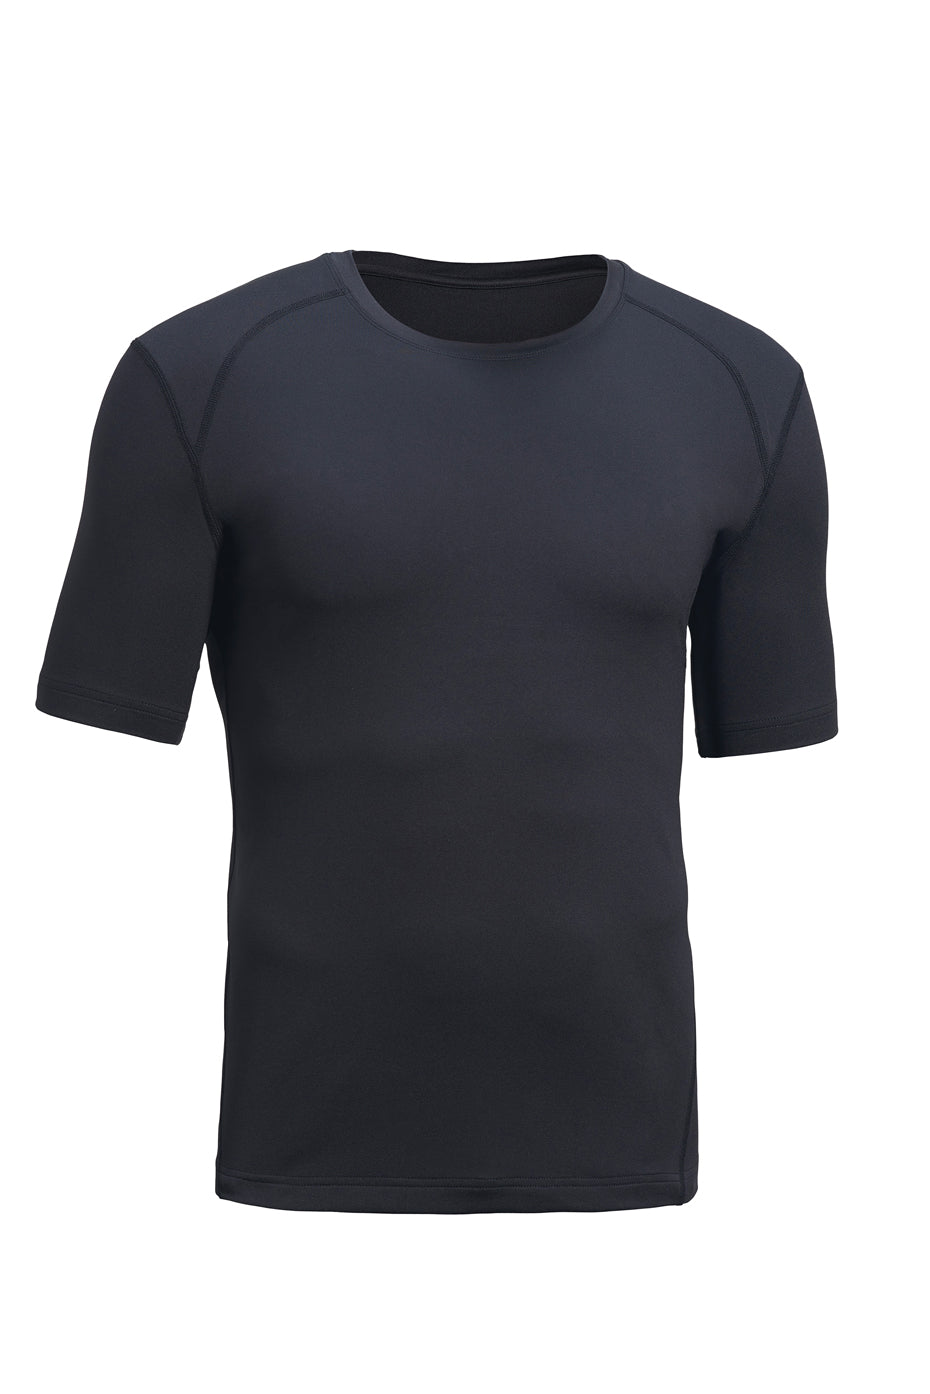 Expert Brand Wholesale Men's Airstretch Fitness Tee in black image 2#black